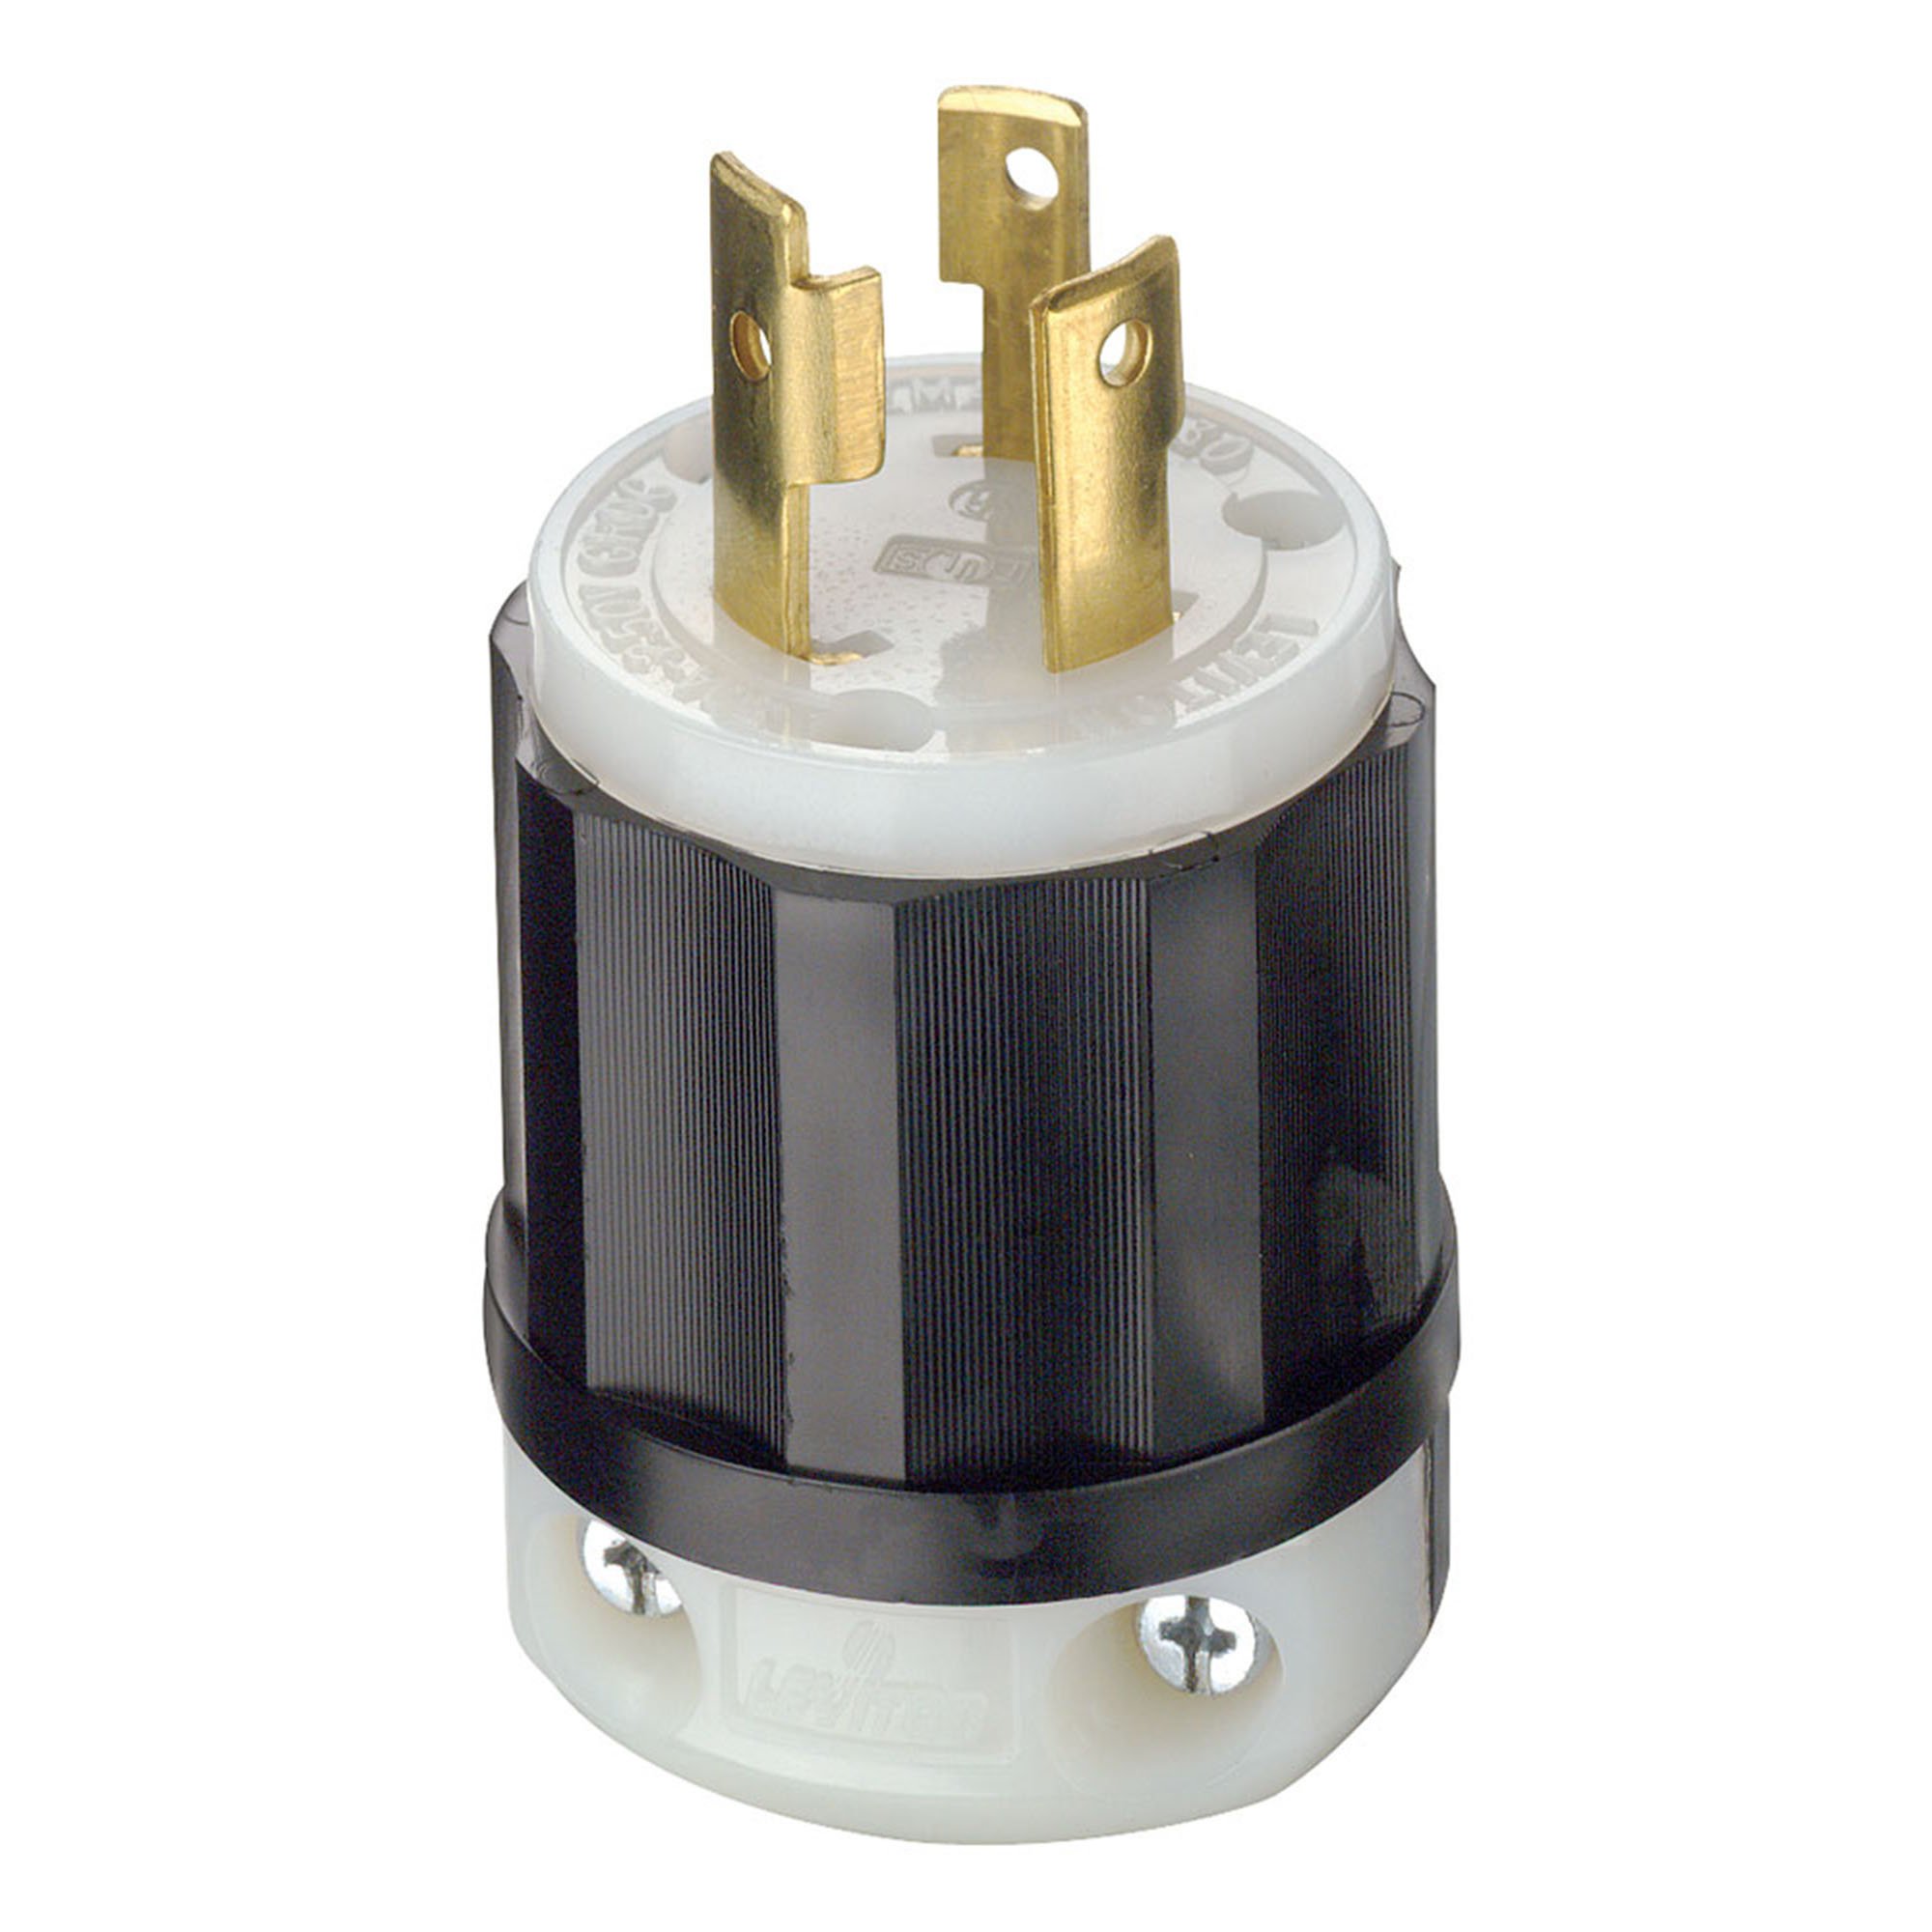 TOMA SIMPLE VISIBLE L/T 3X50A 250V M/NORMAL